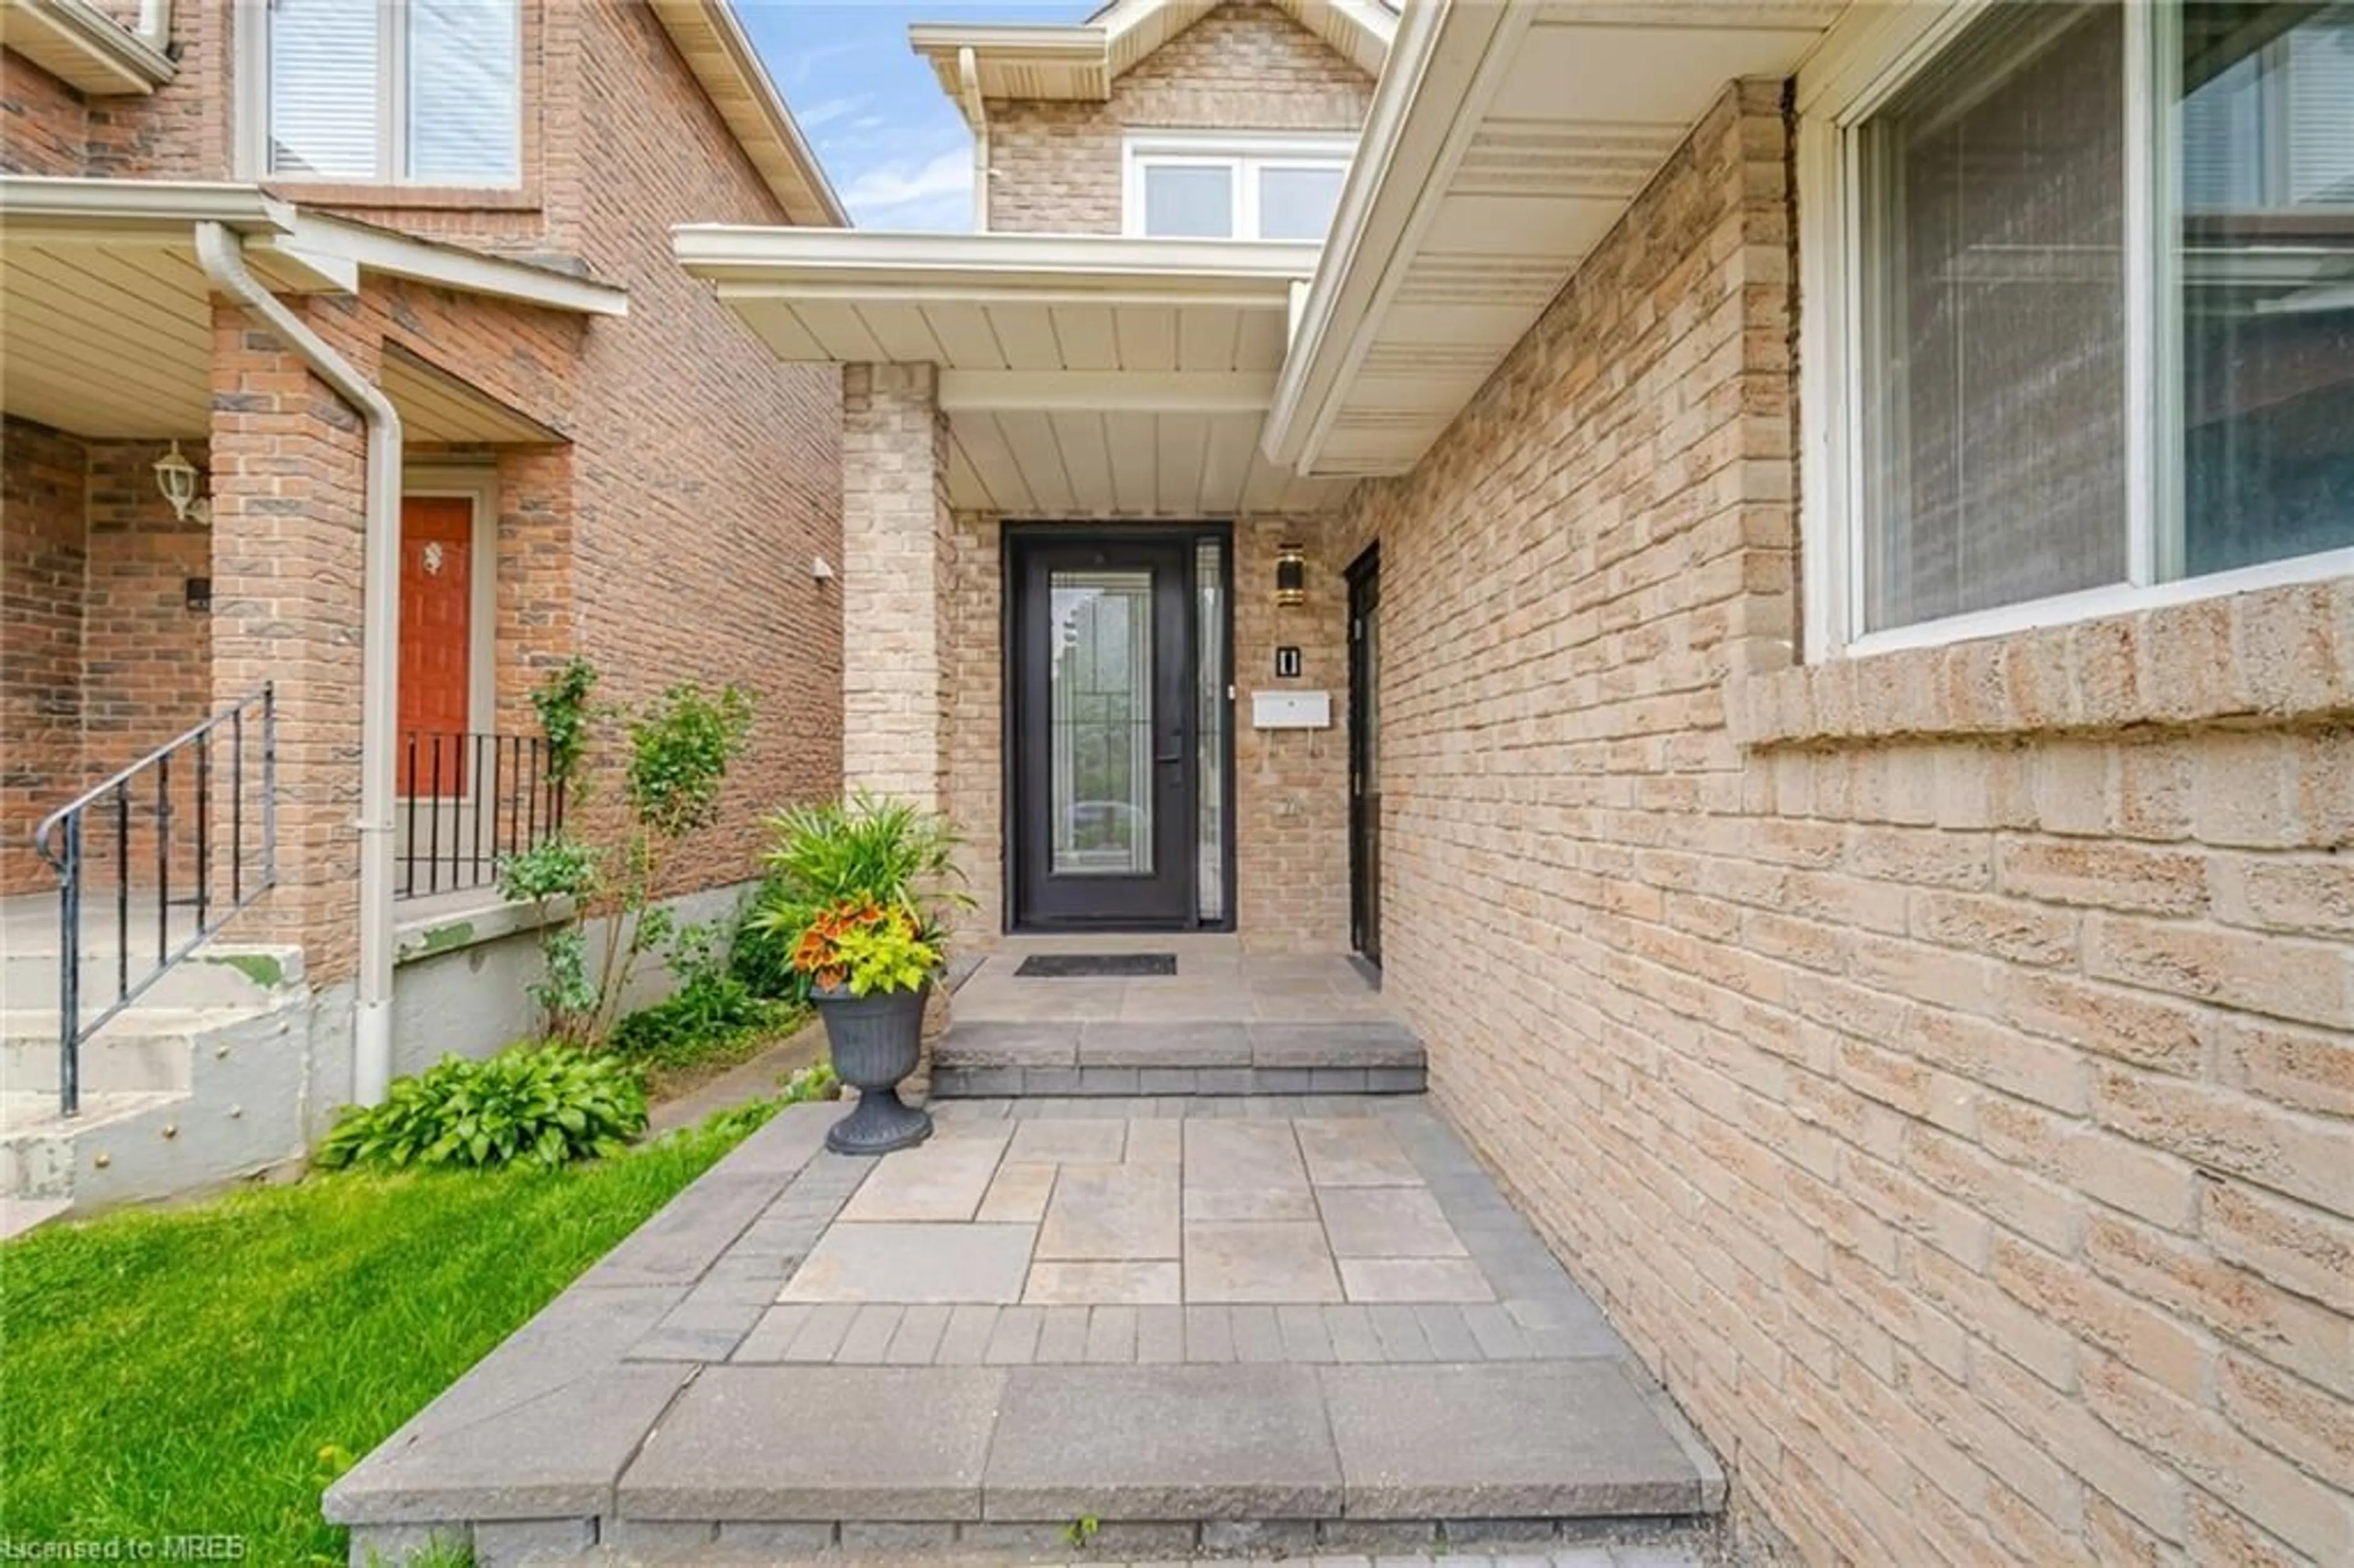 Home with brick exterior material for 4157 Powderhorn Cres, Mississauga Ontario L5L 3B8